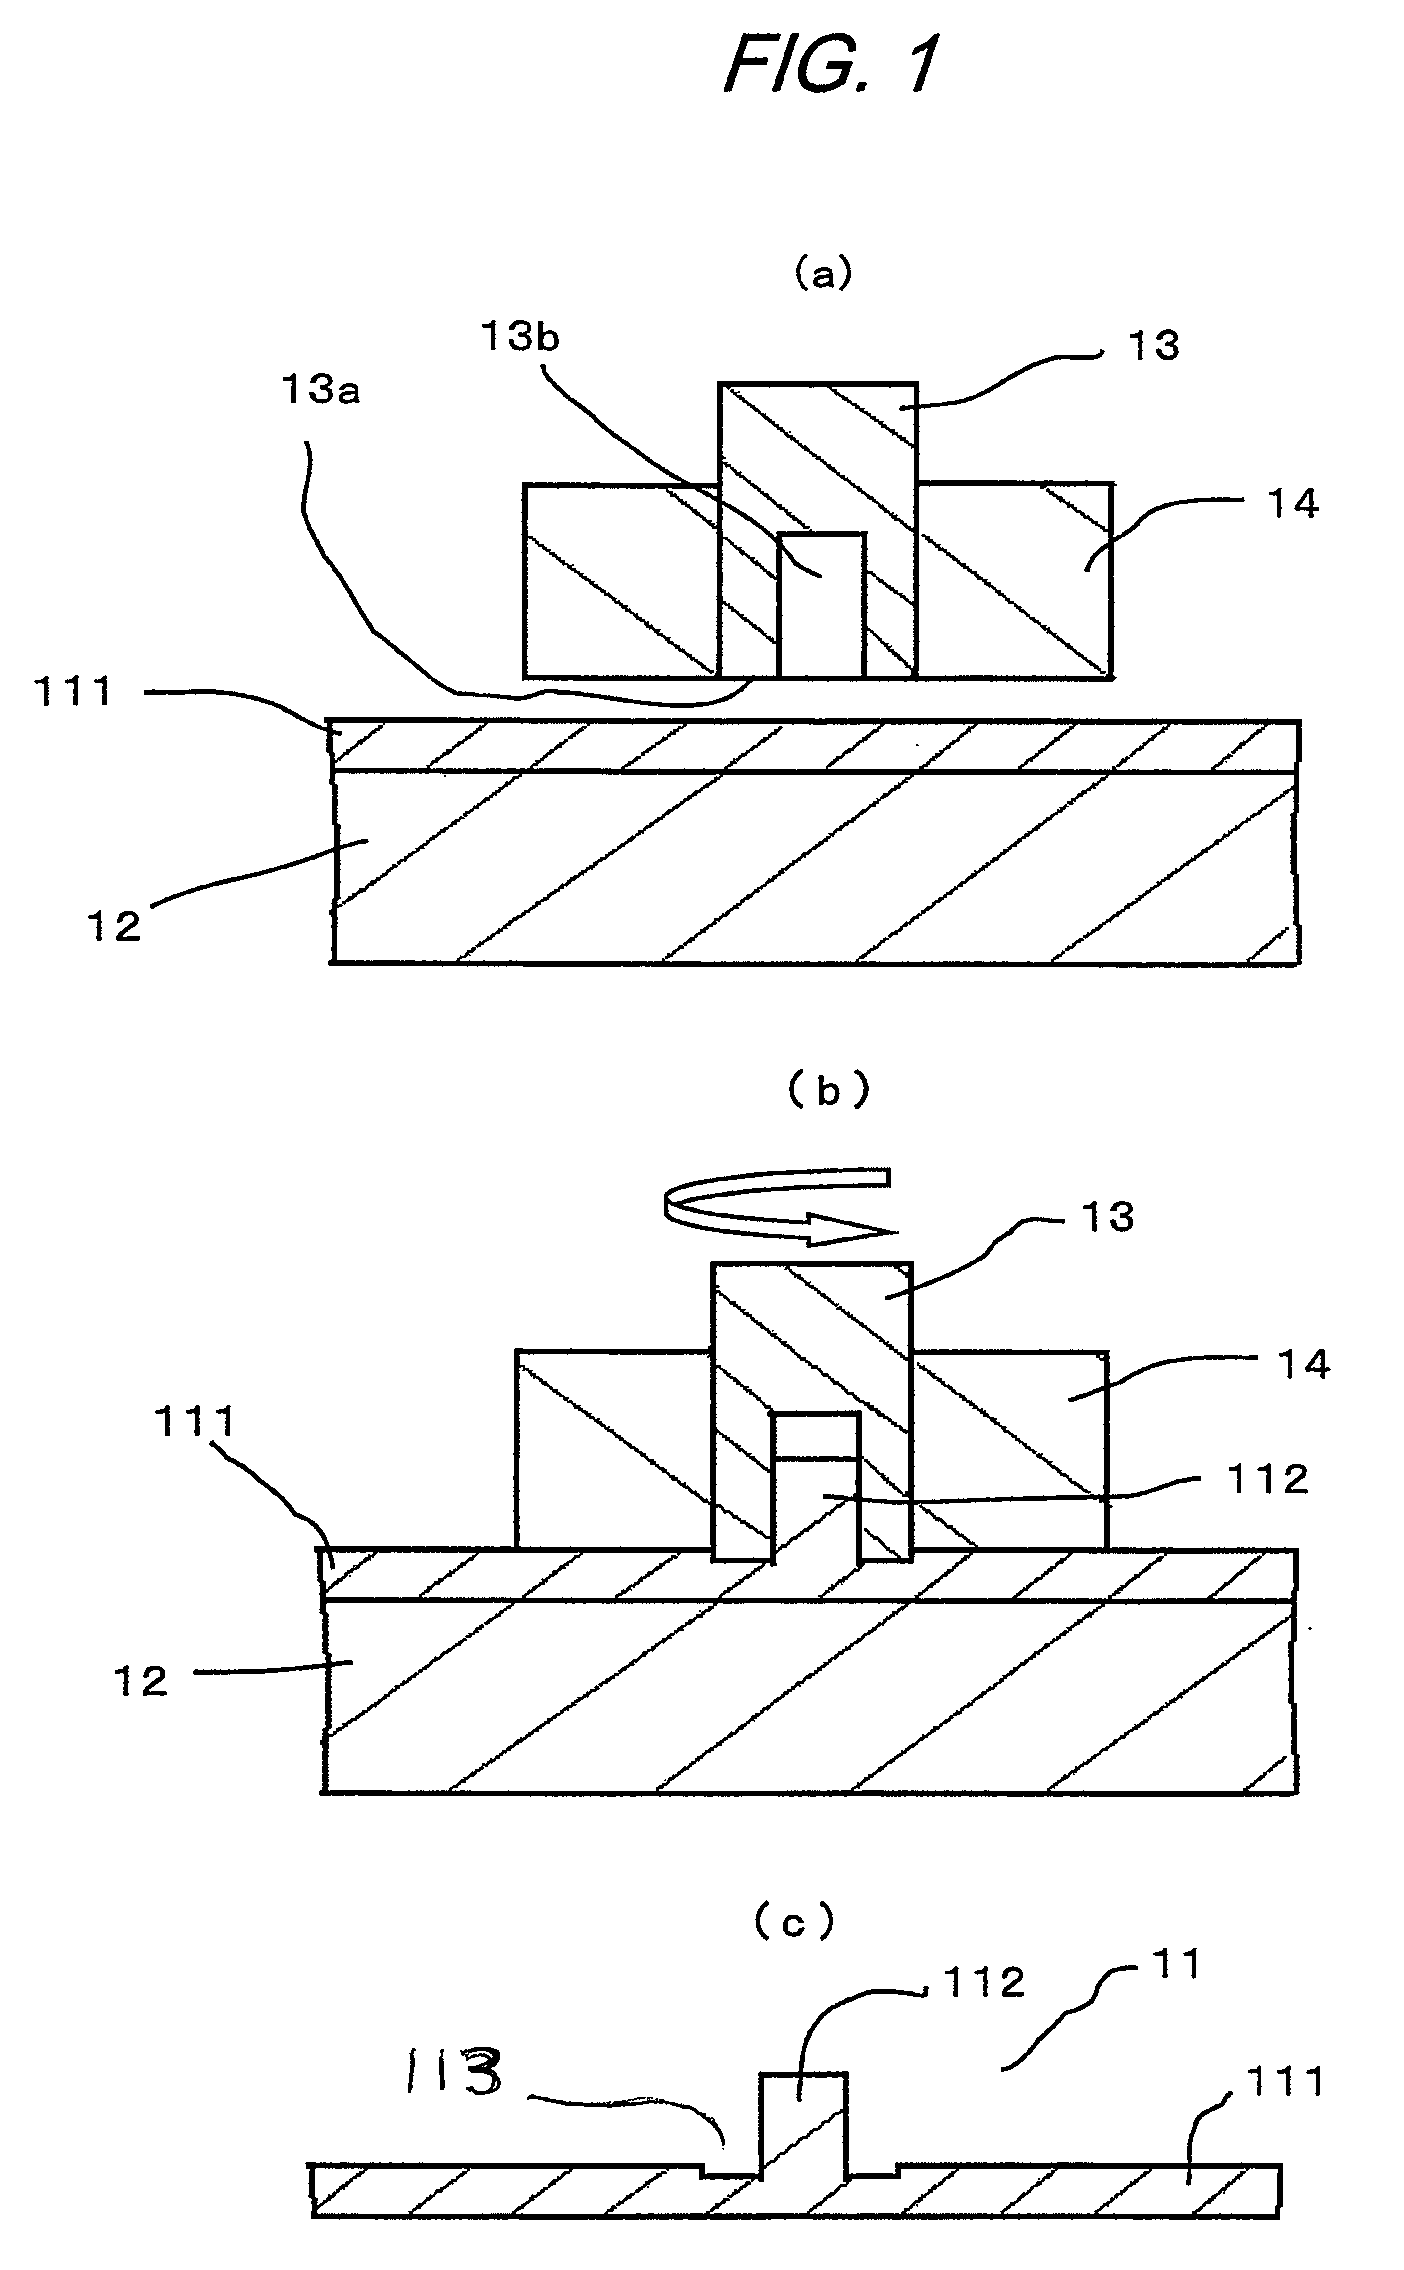 Method of and a device for forming a projection on a metal member and a metal part processed by the method of forming a projection